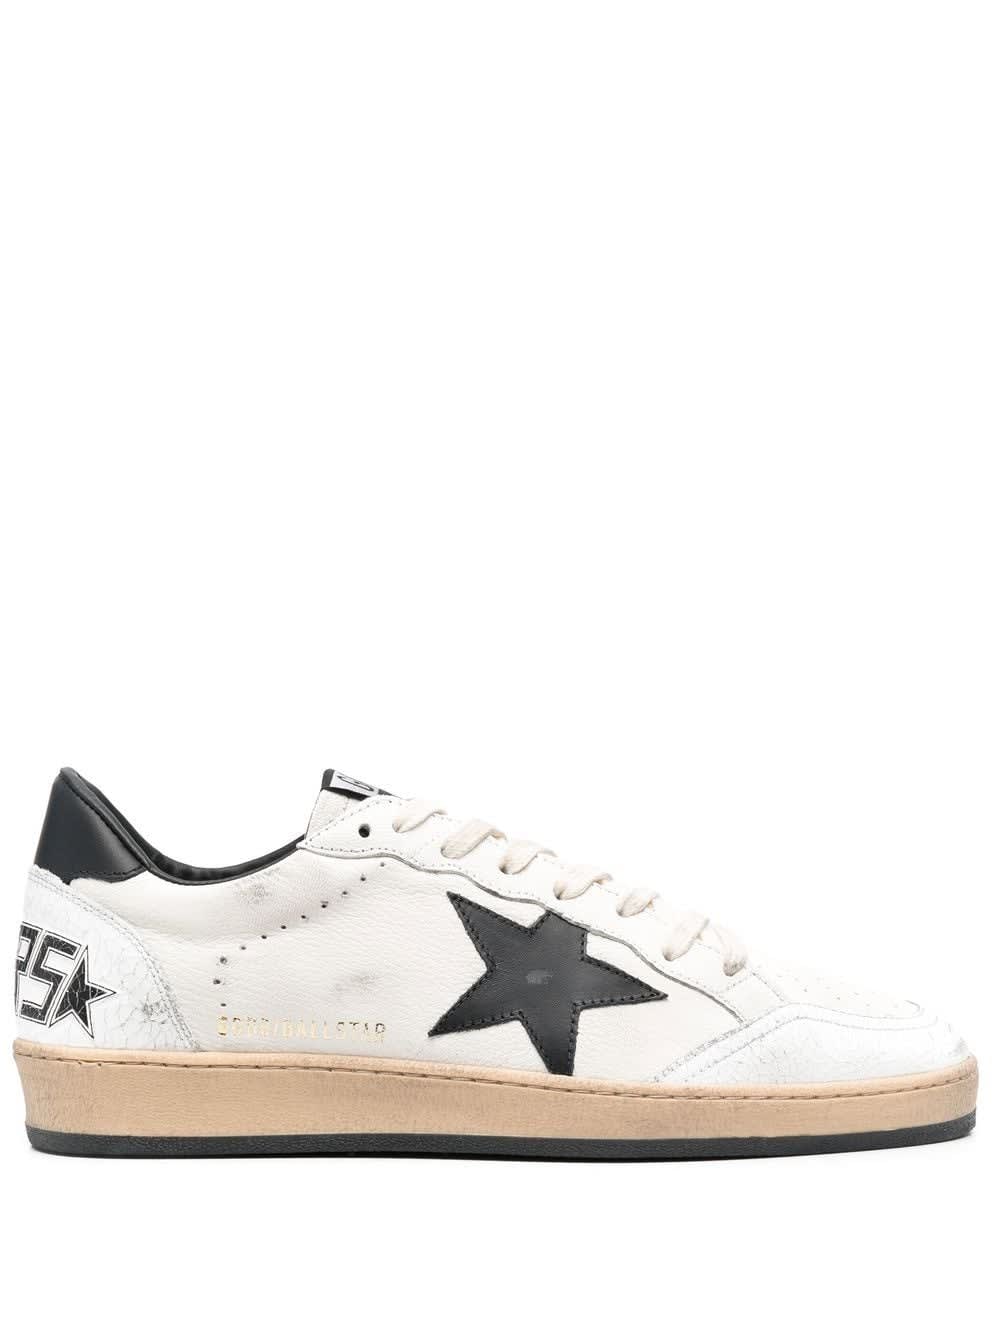 GOLDEN GOOSE BALL STAR NAPPA UPPER LEATHER STAR AND HEEL CRACK TOE AND SPUR